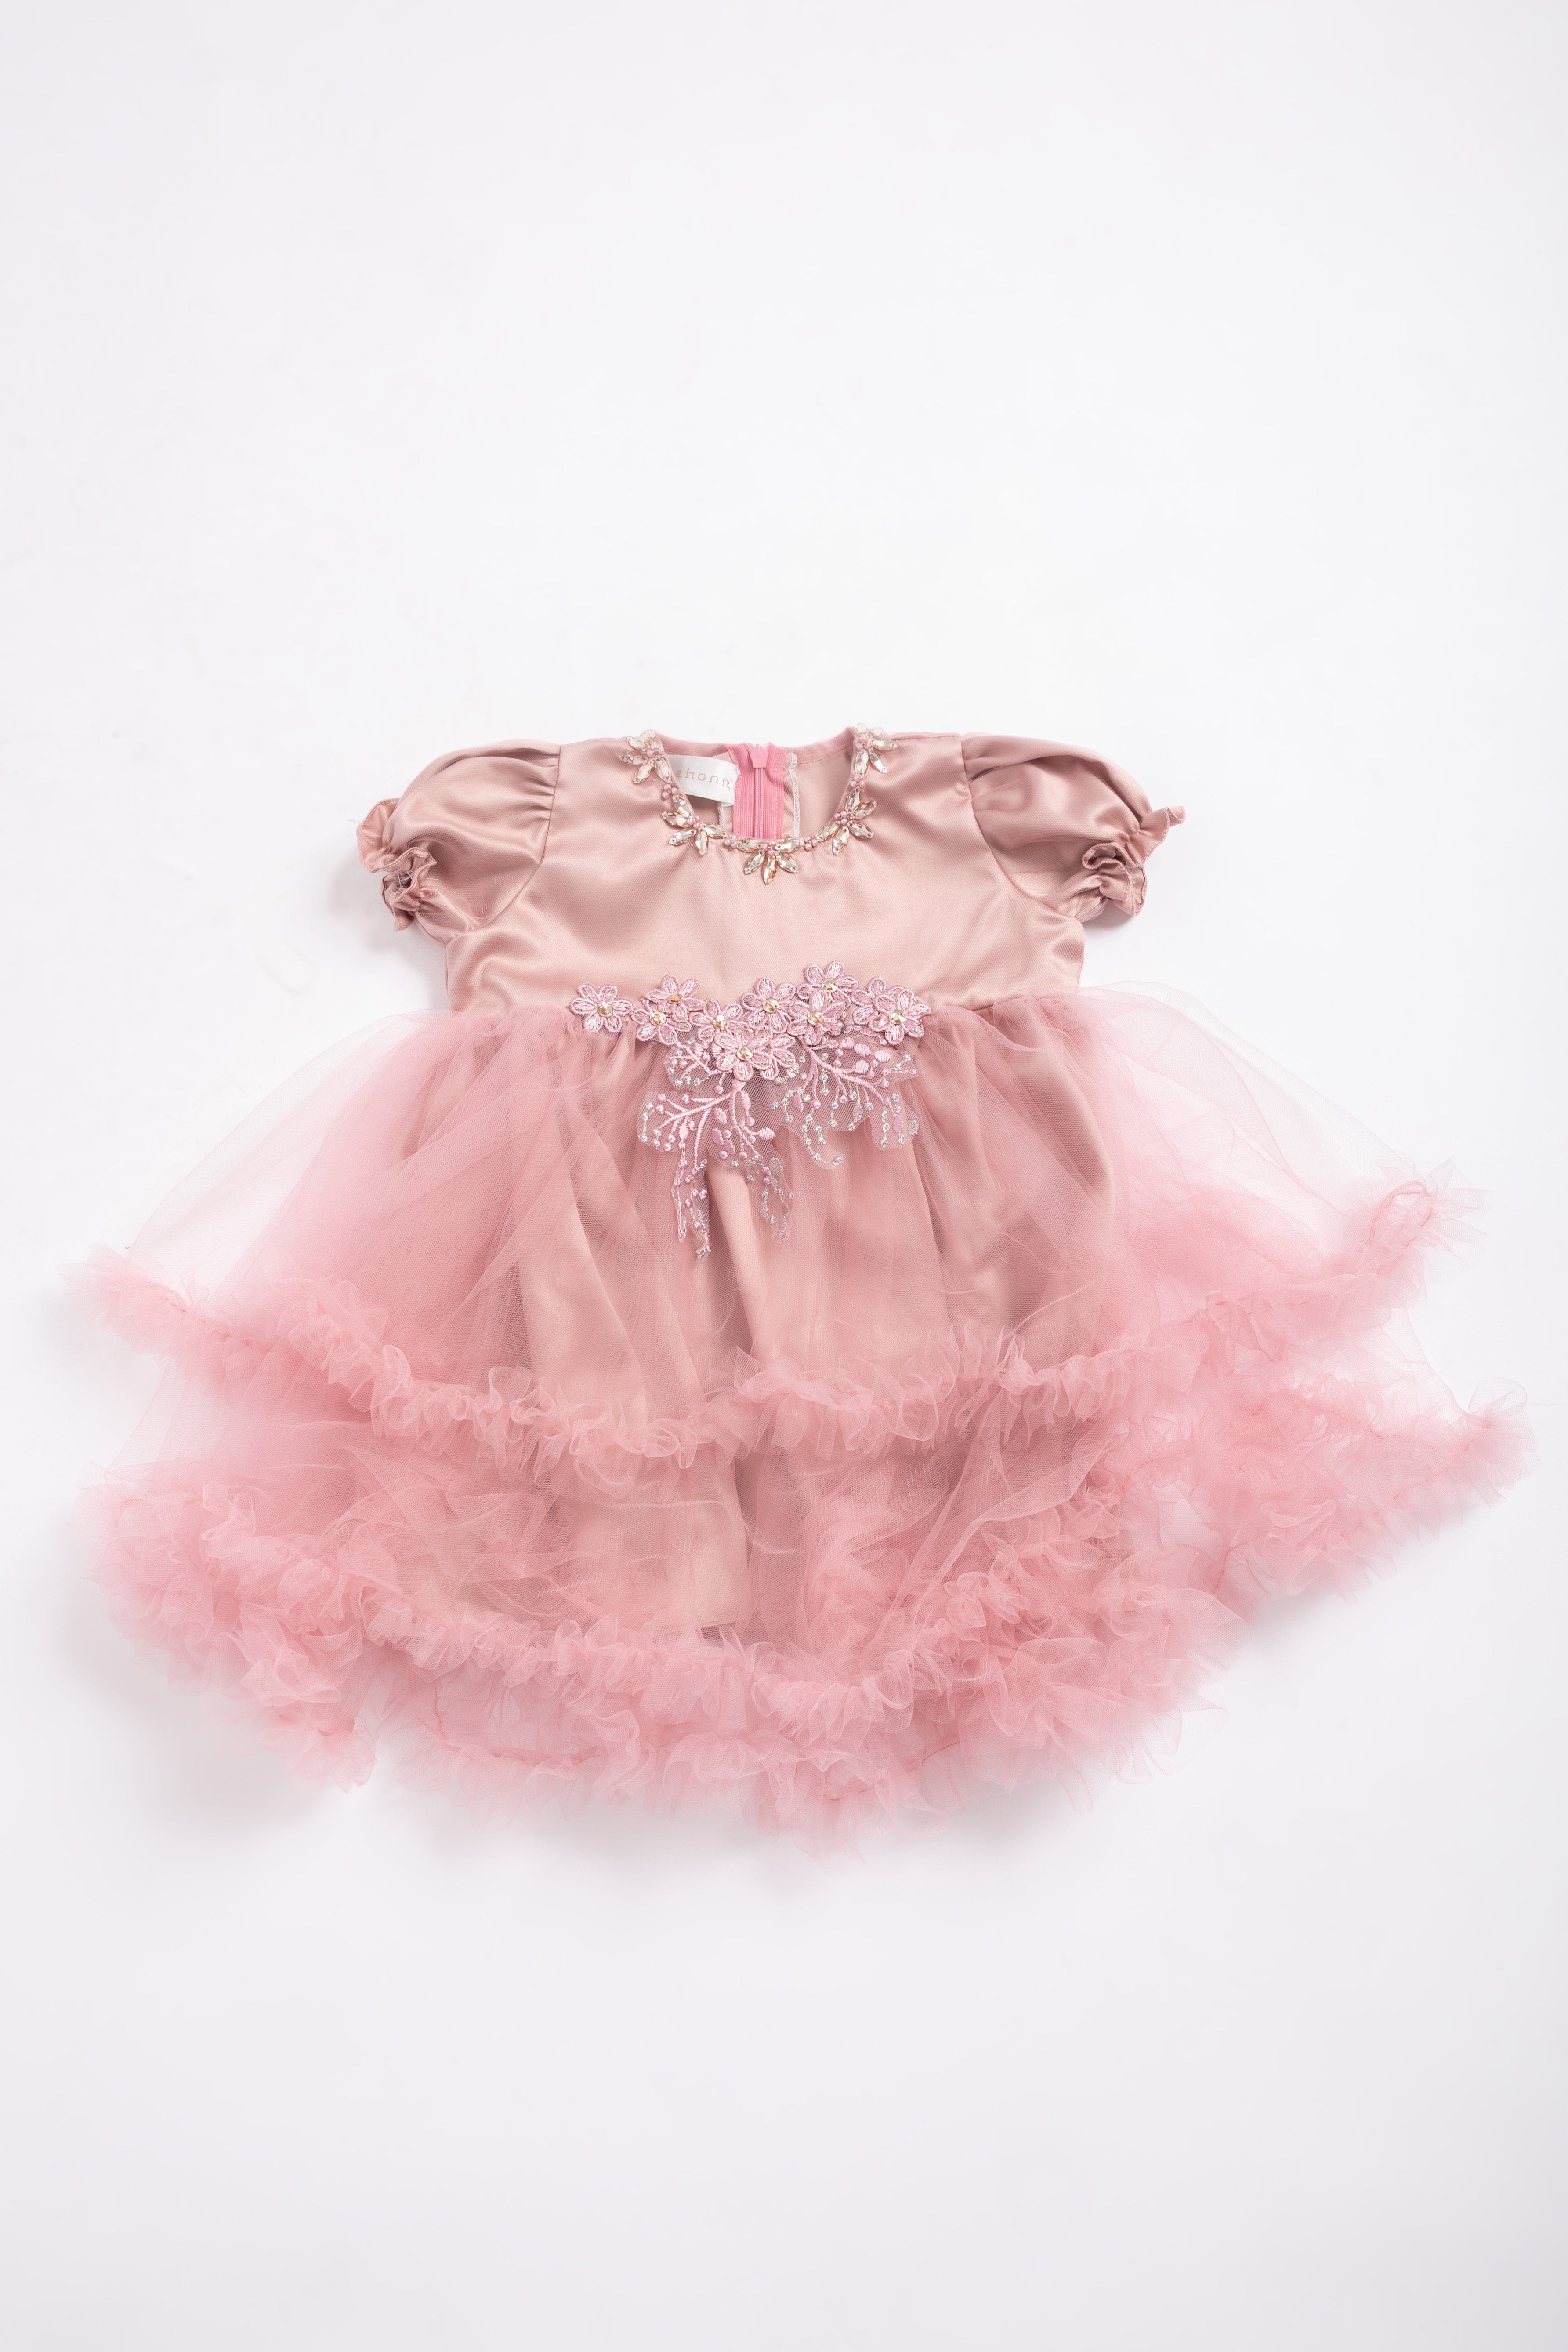 Baby Aria Dress in Dusty Pink